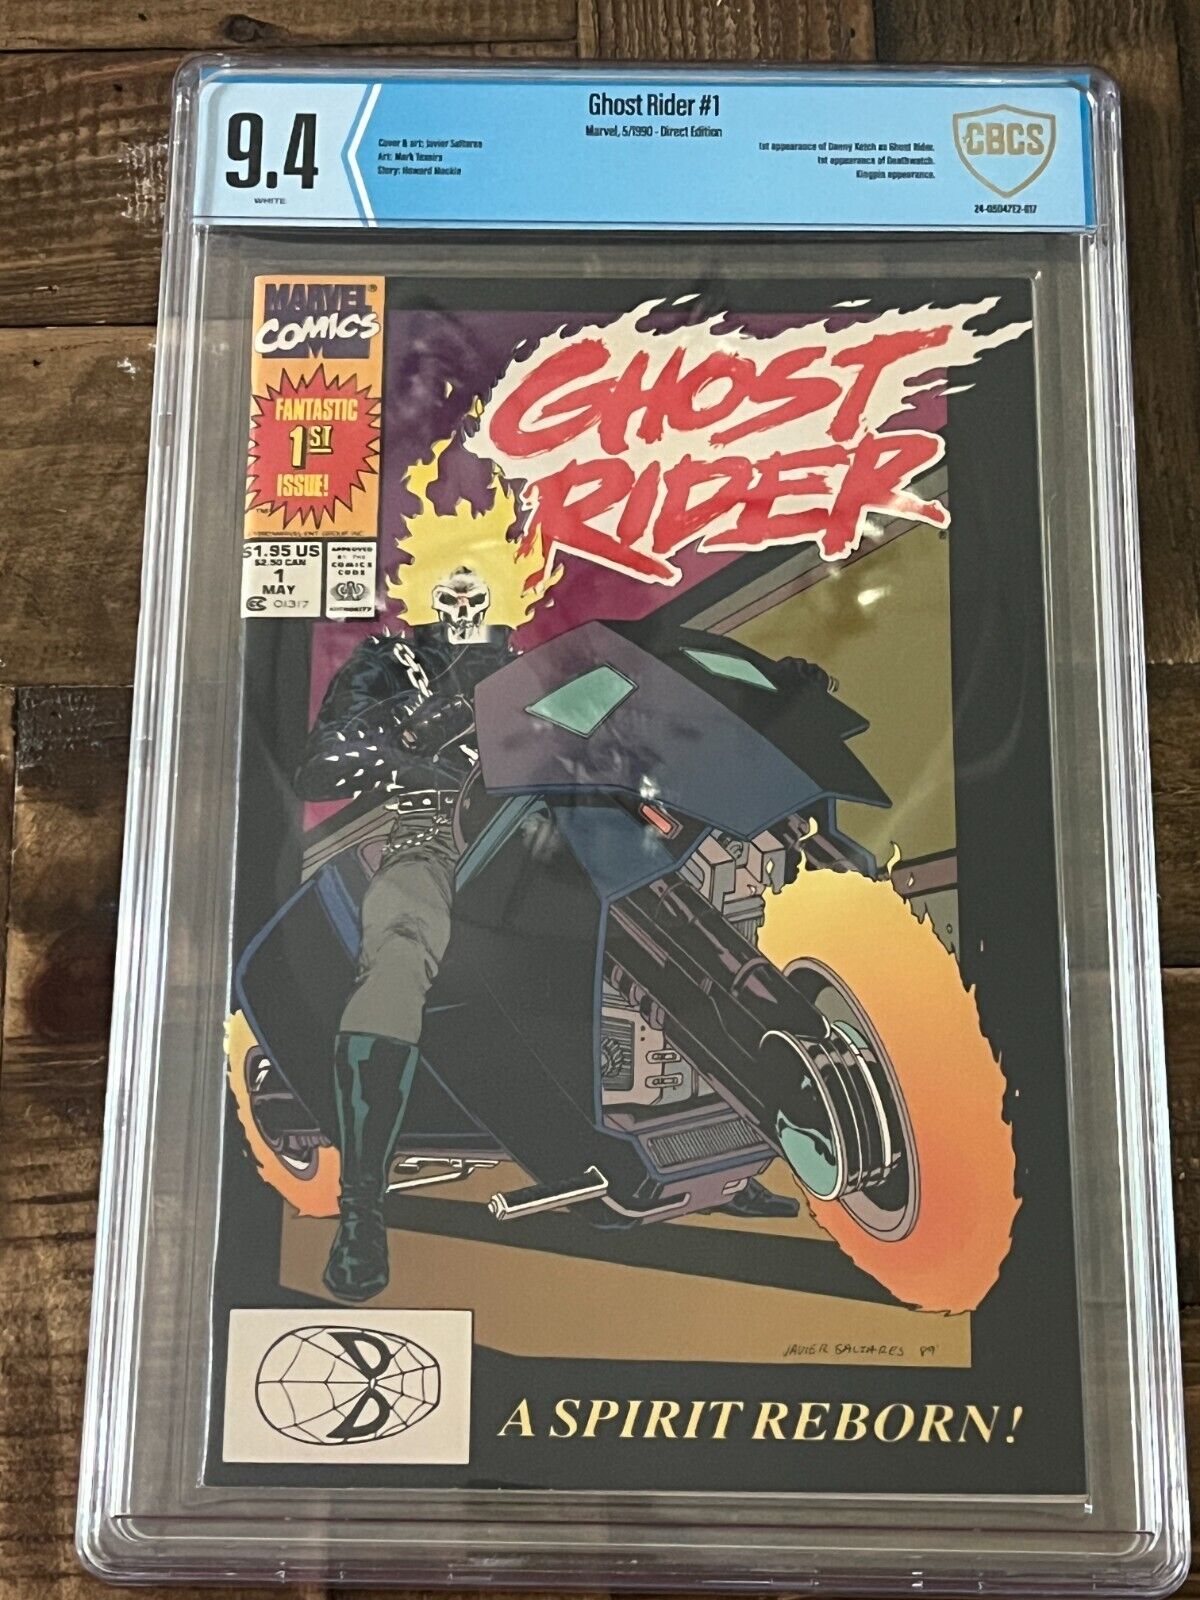 Ghost Rider #1 (Marvel Comics May 1990) CBCS 9.4 White Pages